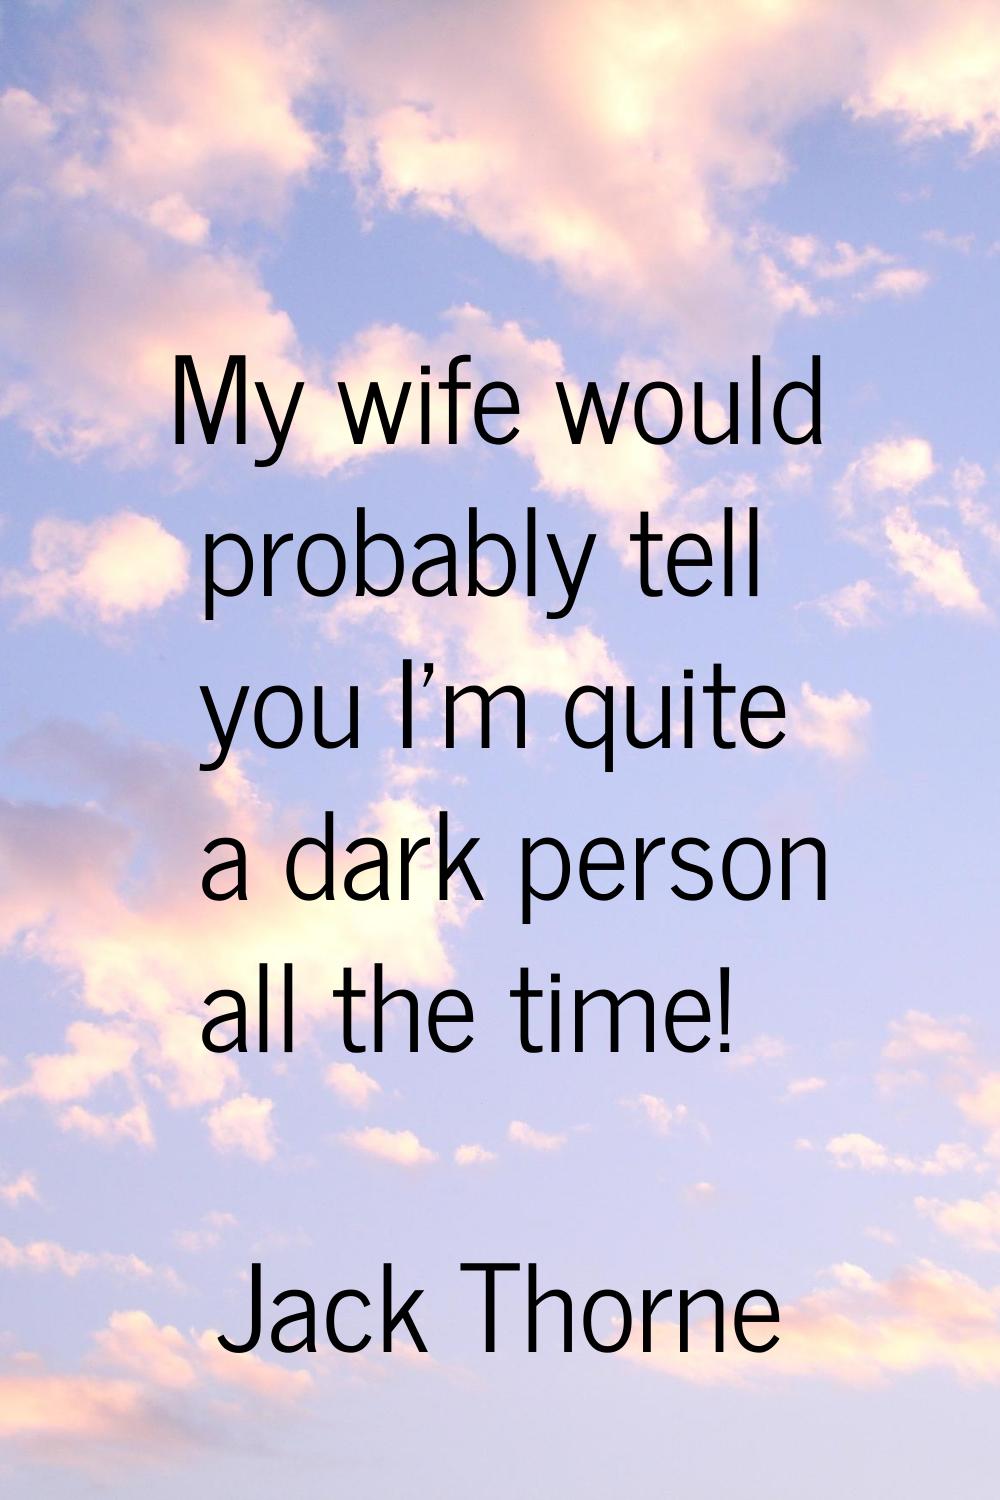 My wife would probably tell you I'm quite a dark person all the time!